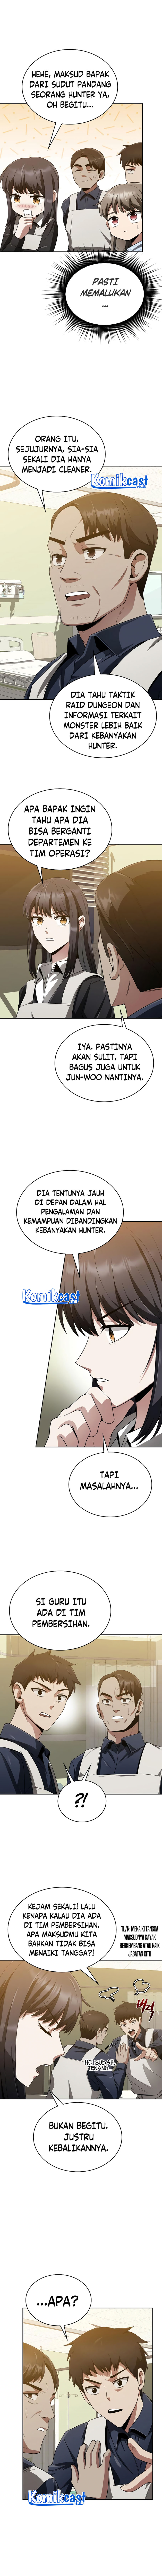 Dilarang COPAS - situs resmi www.mangacanblog.com - Komik clever cleaning life of the returned genius hunter 009 - chapter 9 10 Indonesia clever cleaning life of the returned genius hunter 009 - chapter 9 Terbaru 10|Baca Manga Komik Indonesia|Mangacan